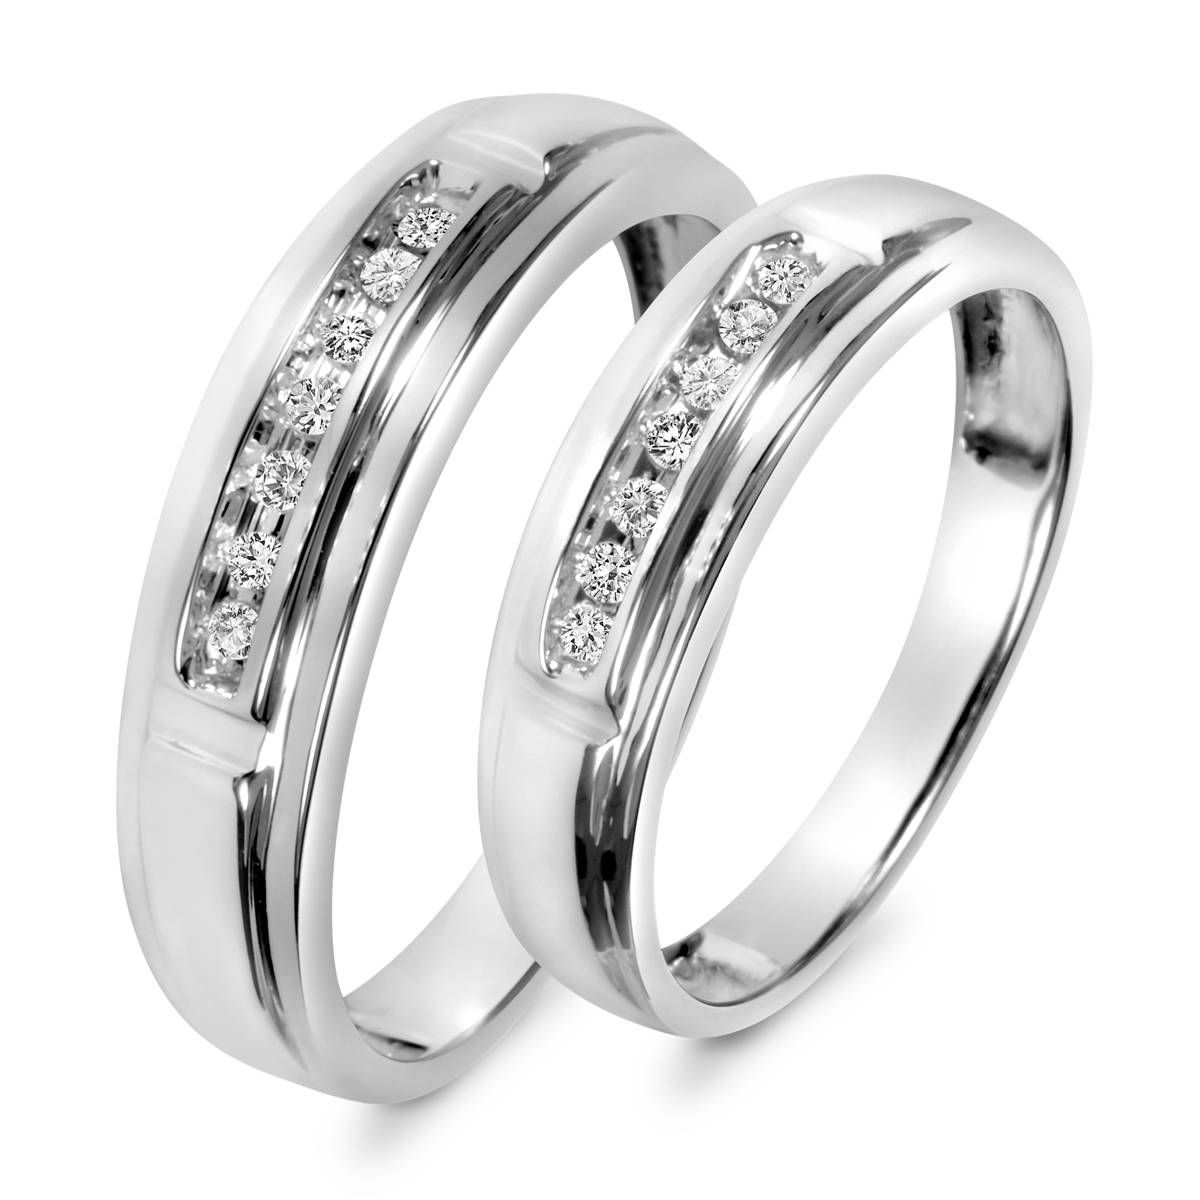 1/8 Carat T.w. Diamond His And Hers Wedding Band Set 10k White Gold Intended For His And Her Wedding Bands Sets (Photo 34 of 339)